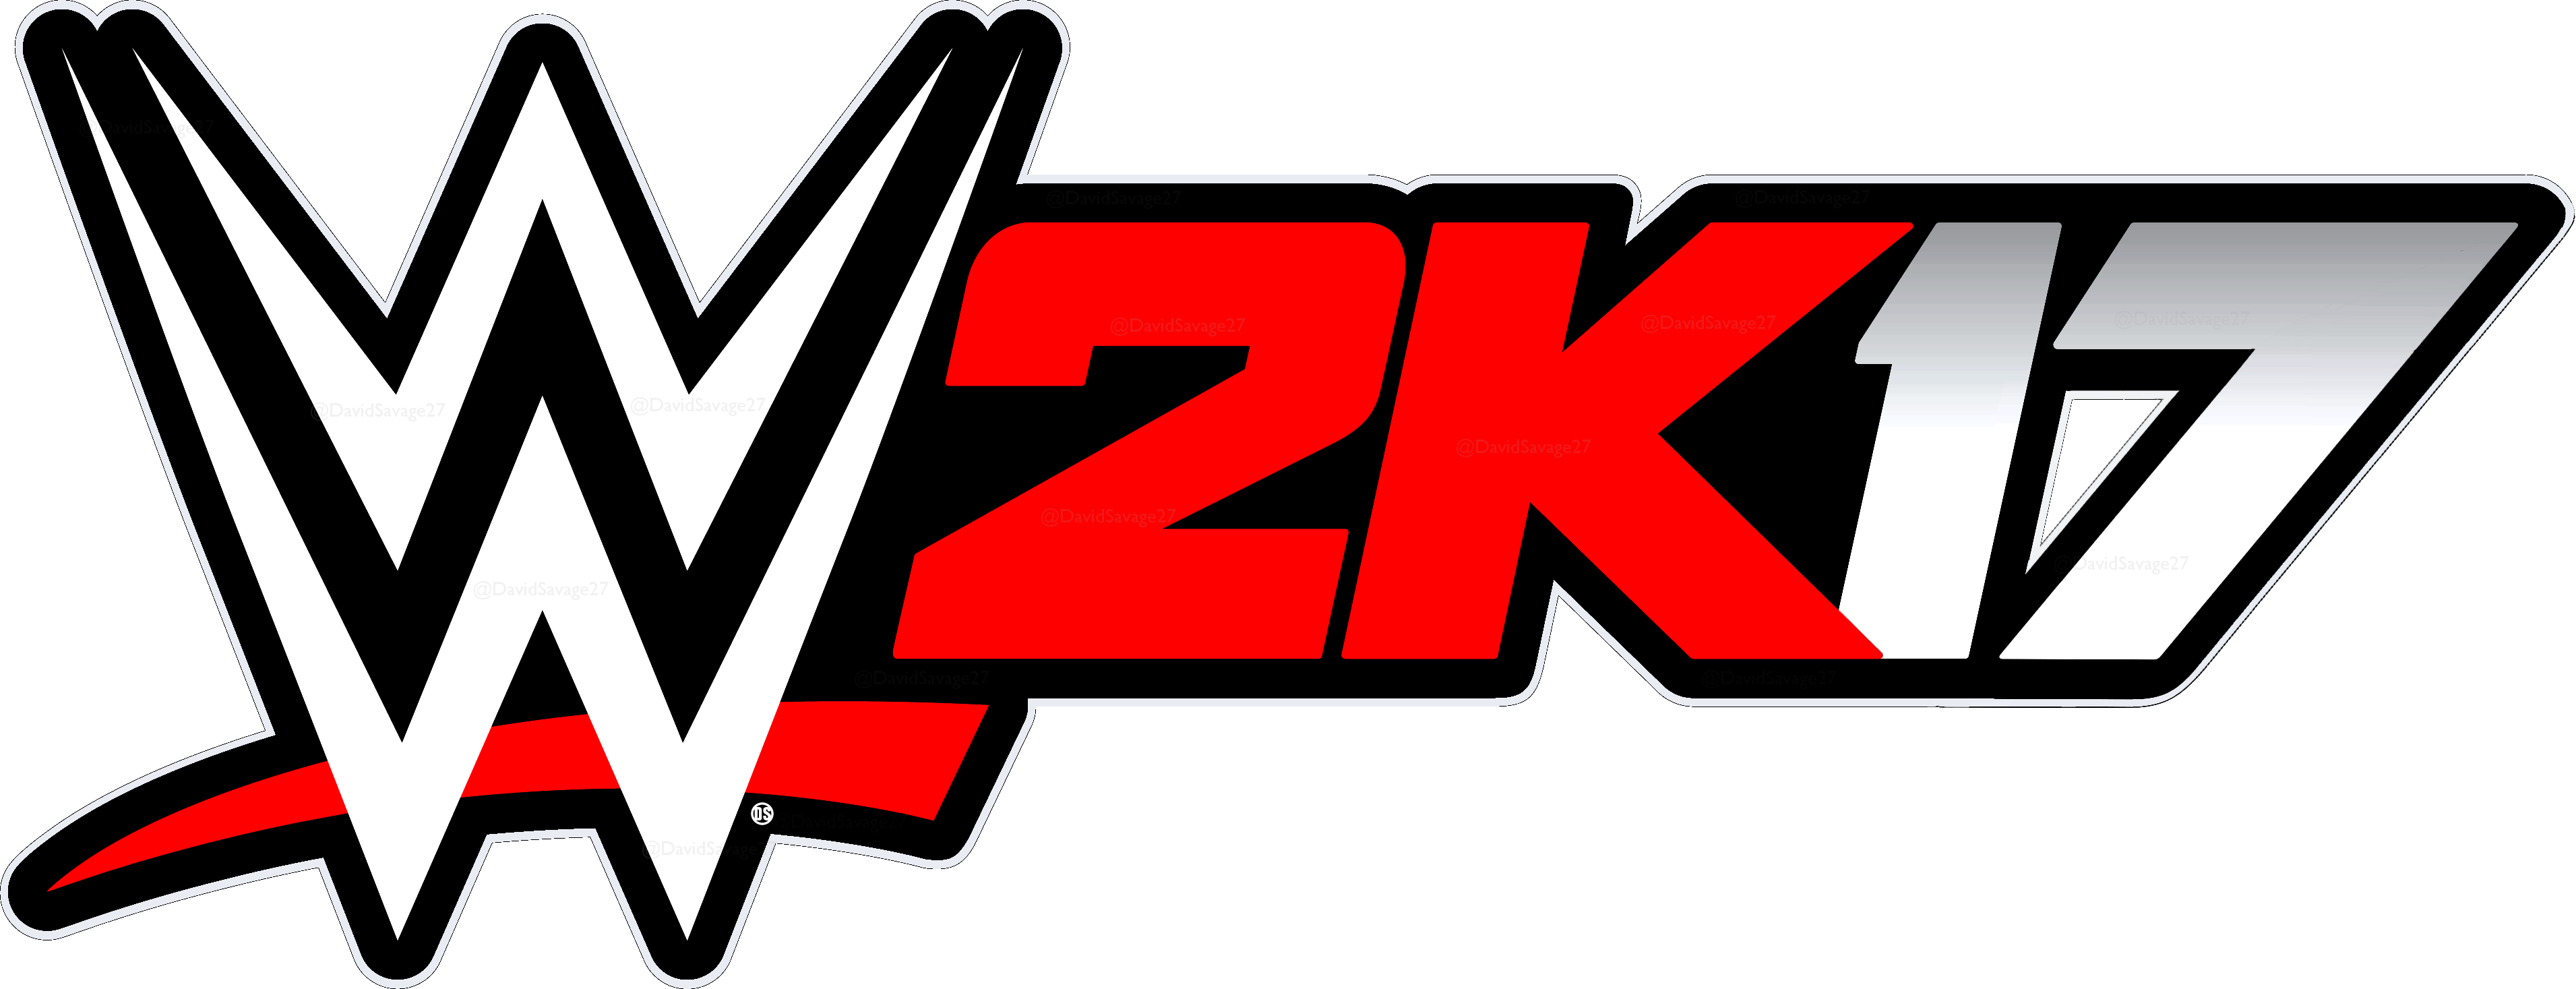 wwe_2k17_unofficial_logo_by_ultimate_savage-d9h5npi.png